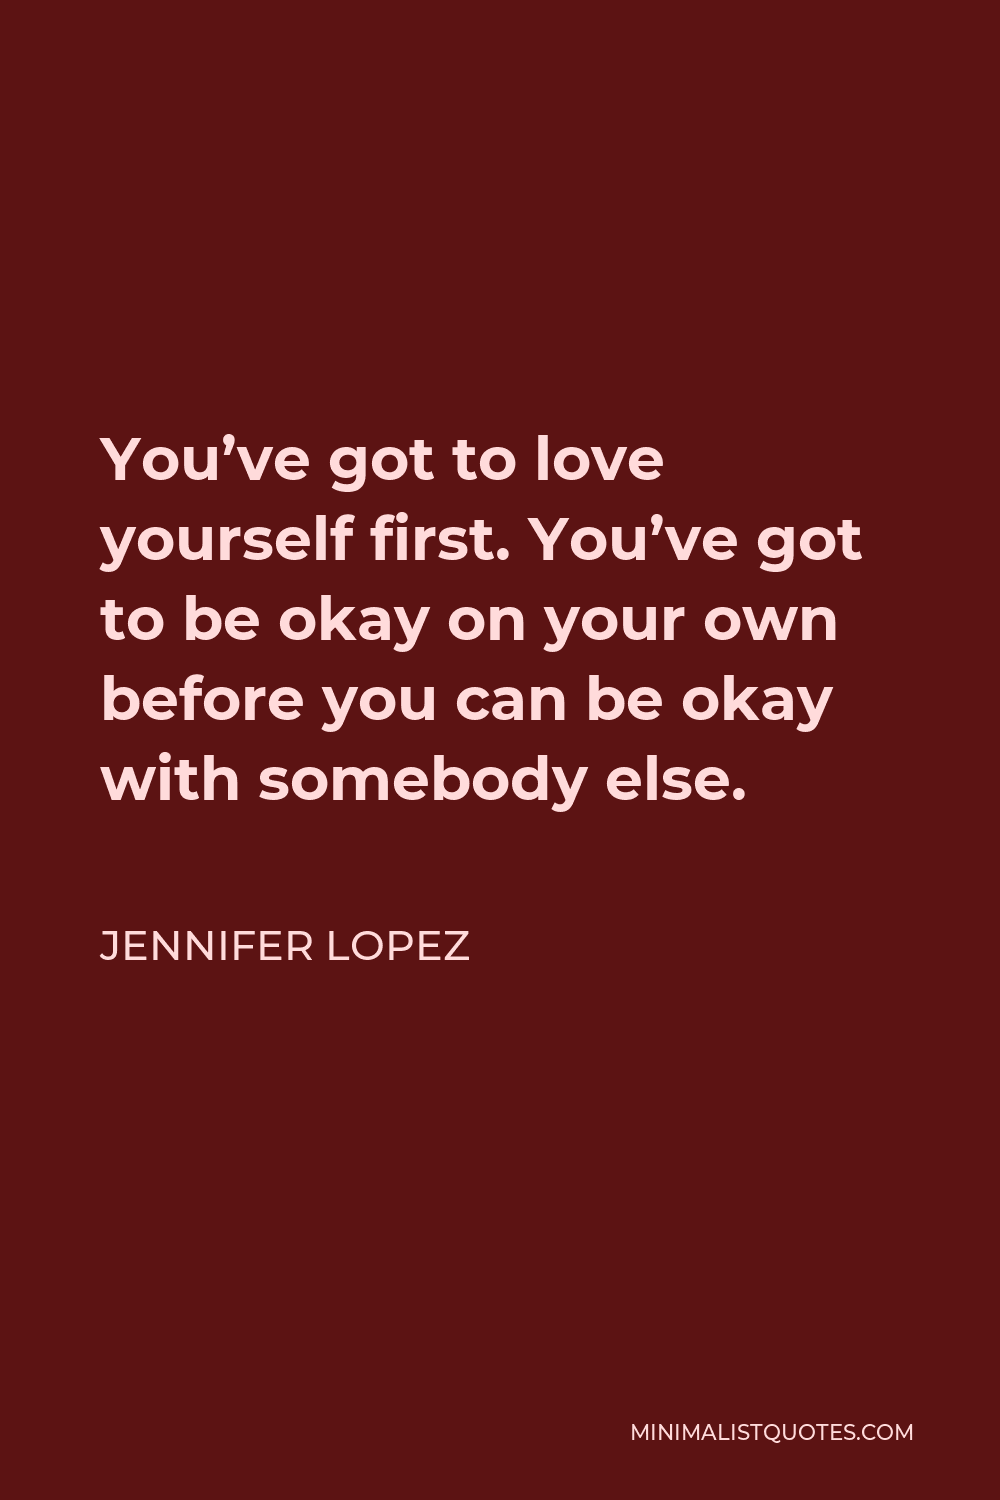 Jennifer Lopez Quote - You’ve got to love yourself first. You’ve got to be okay on your own before you can be okay with somebody else.